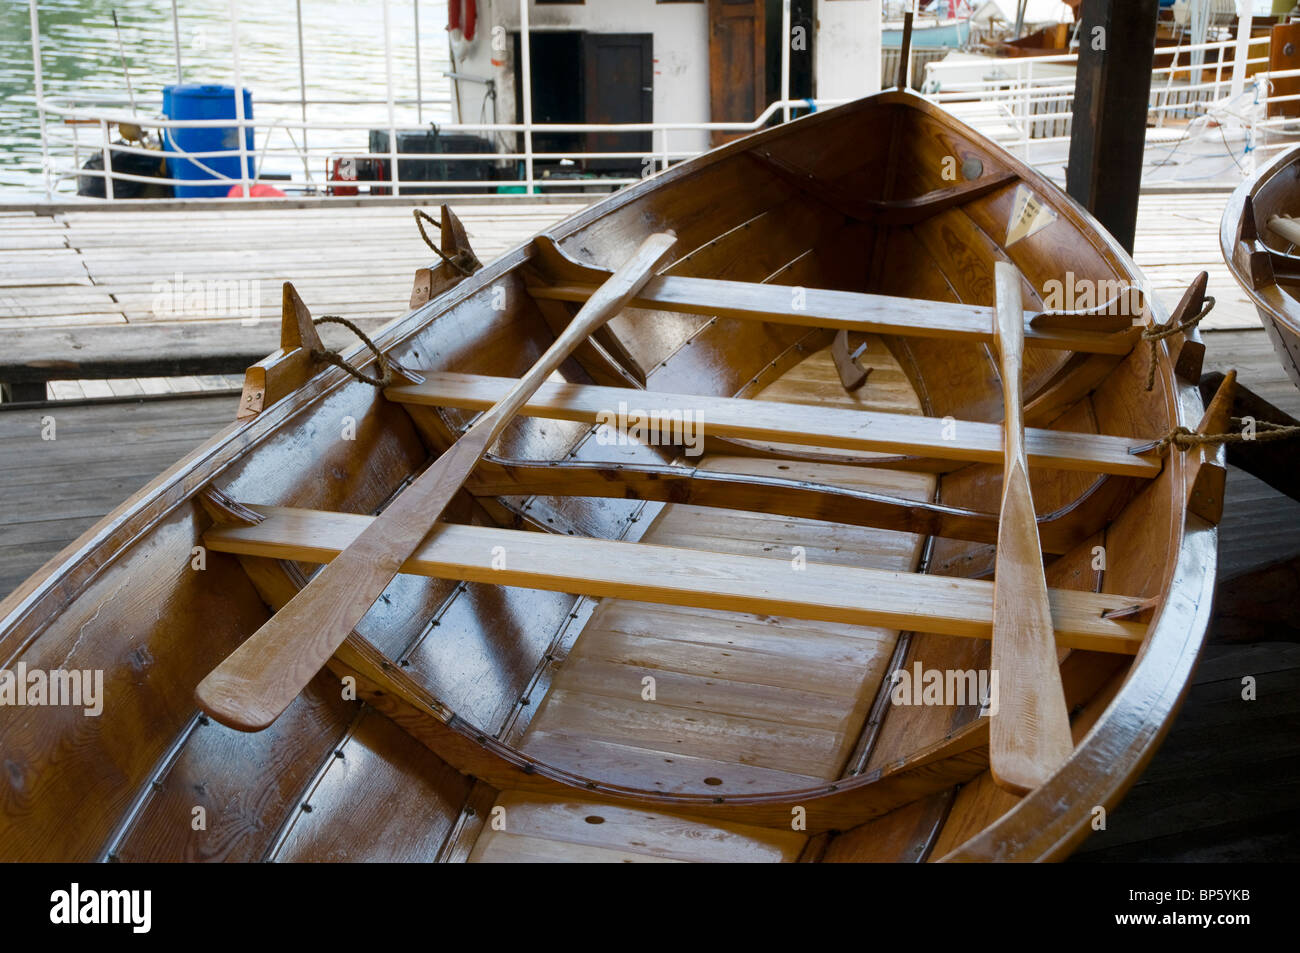 Traditionally built wooden rowing boat with oars at the marine museum in Norheimsund, Western Norway. Stock Photo